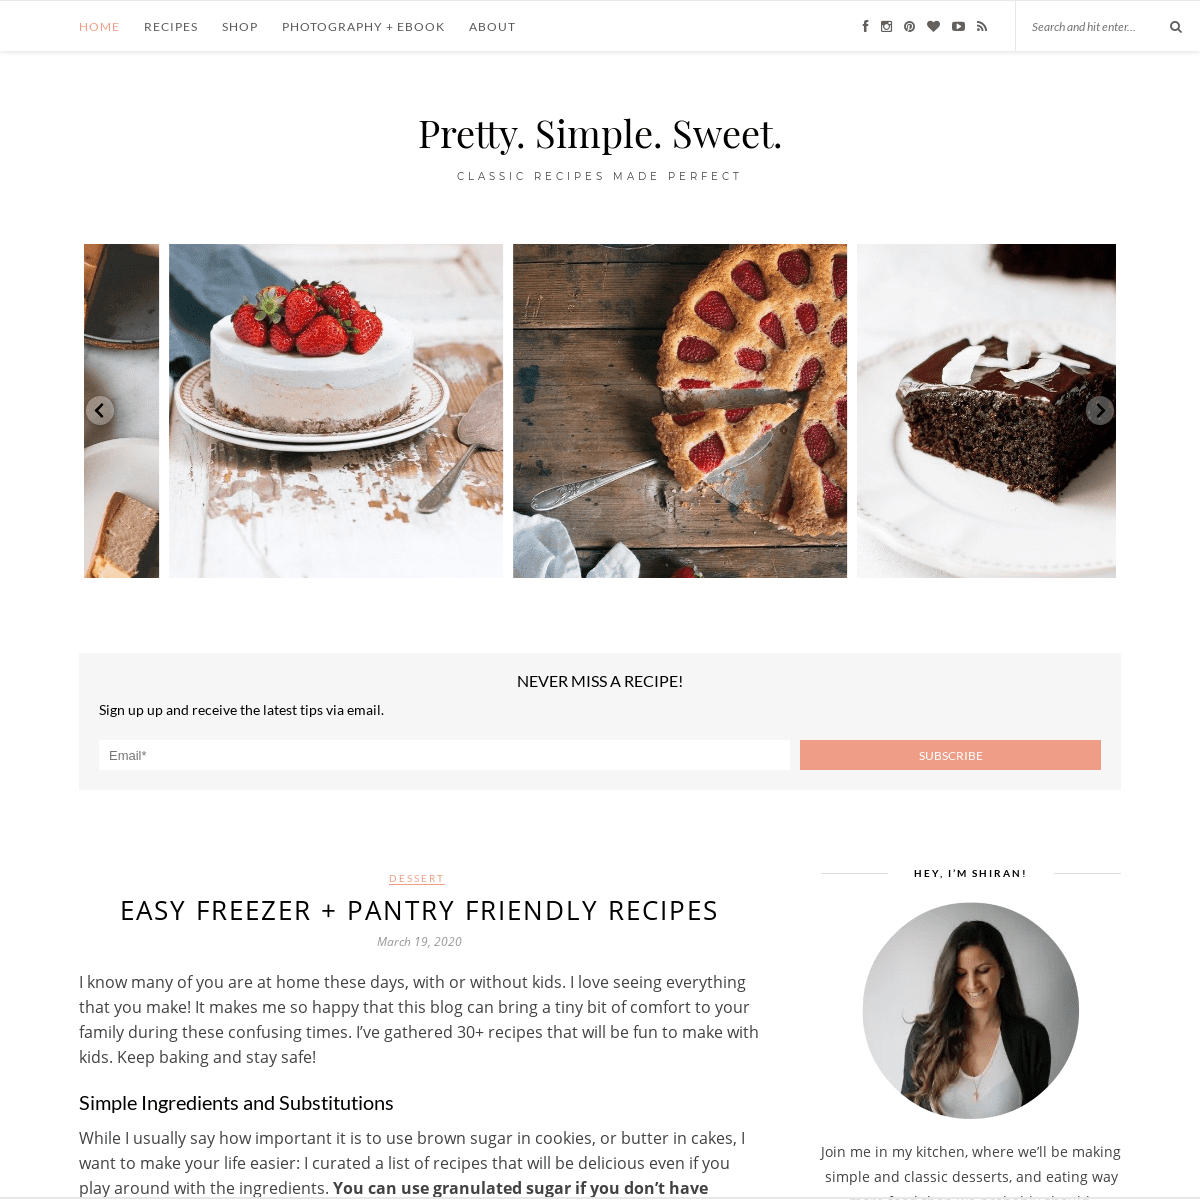 A complete backup of prettysimplesweet.com